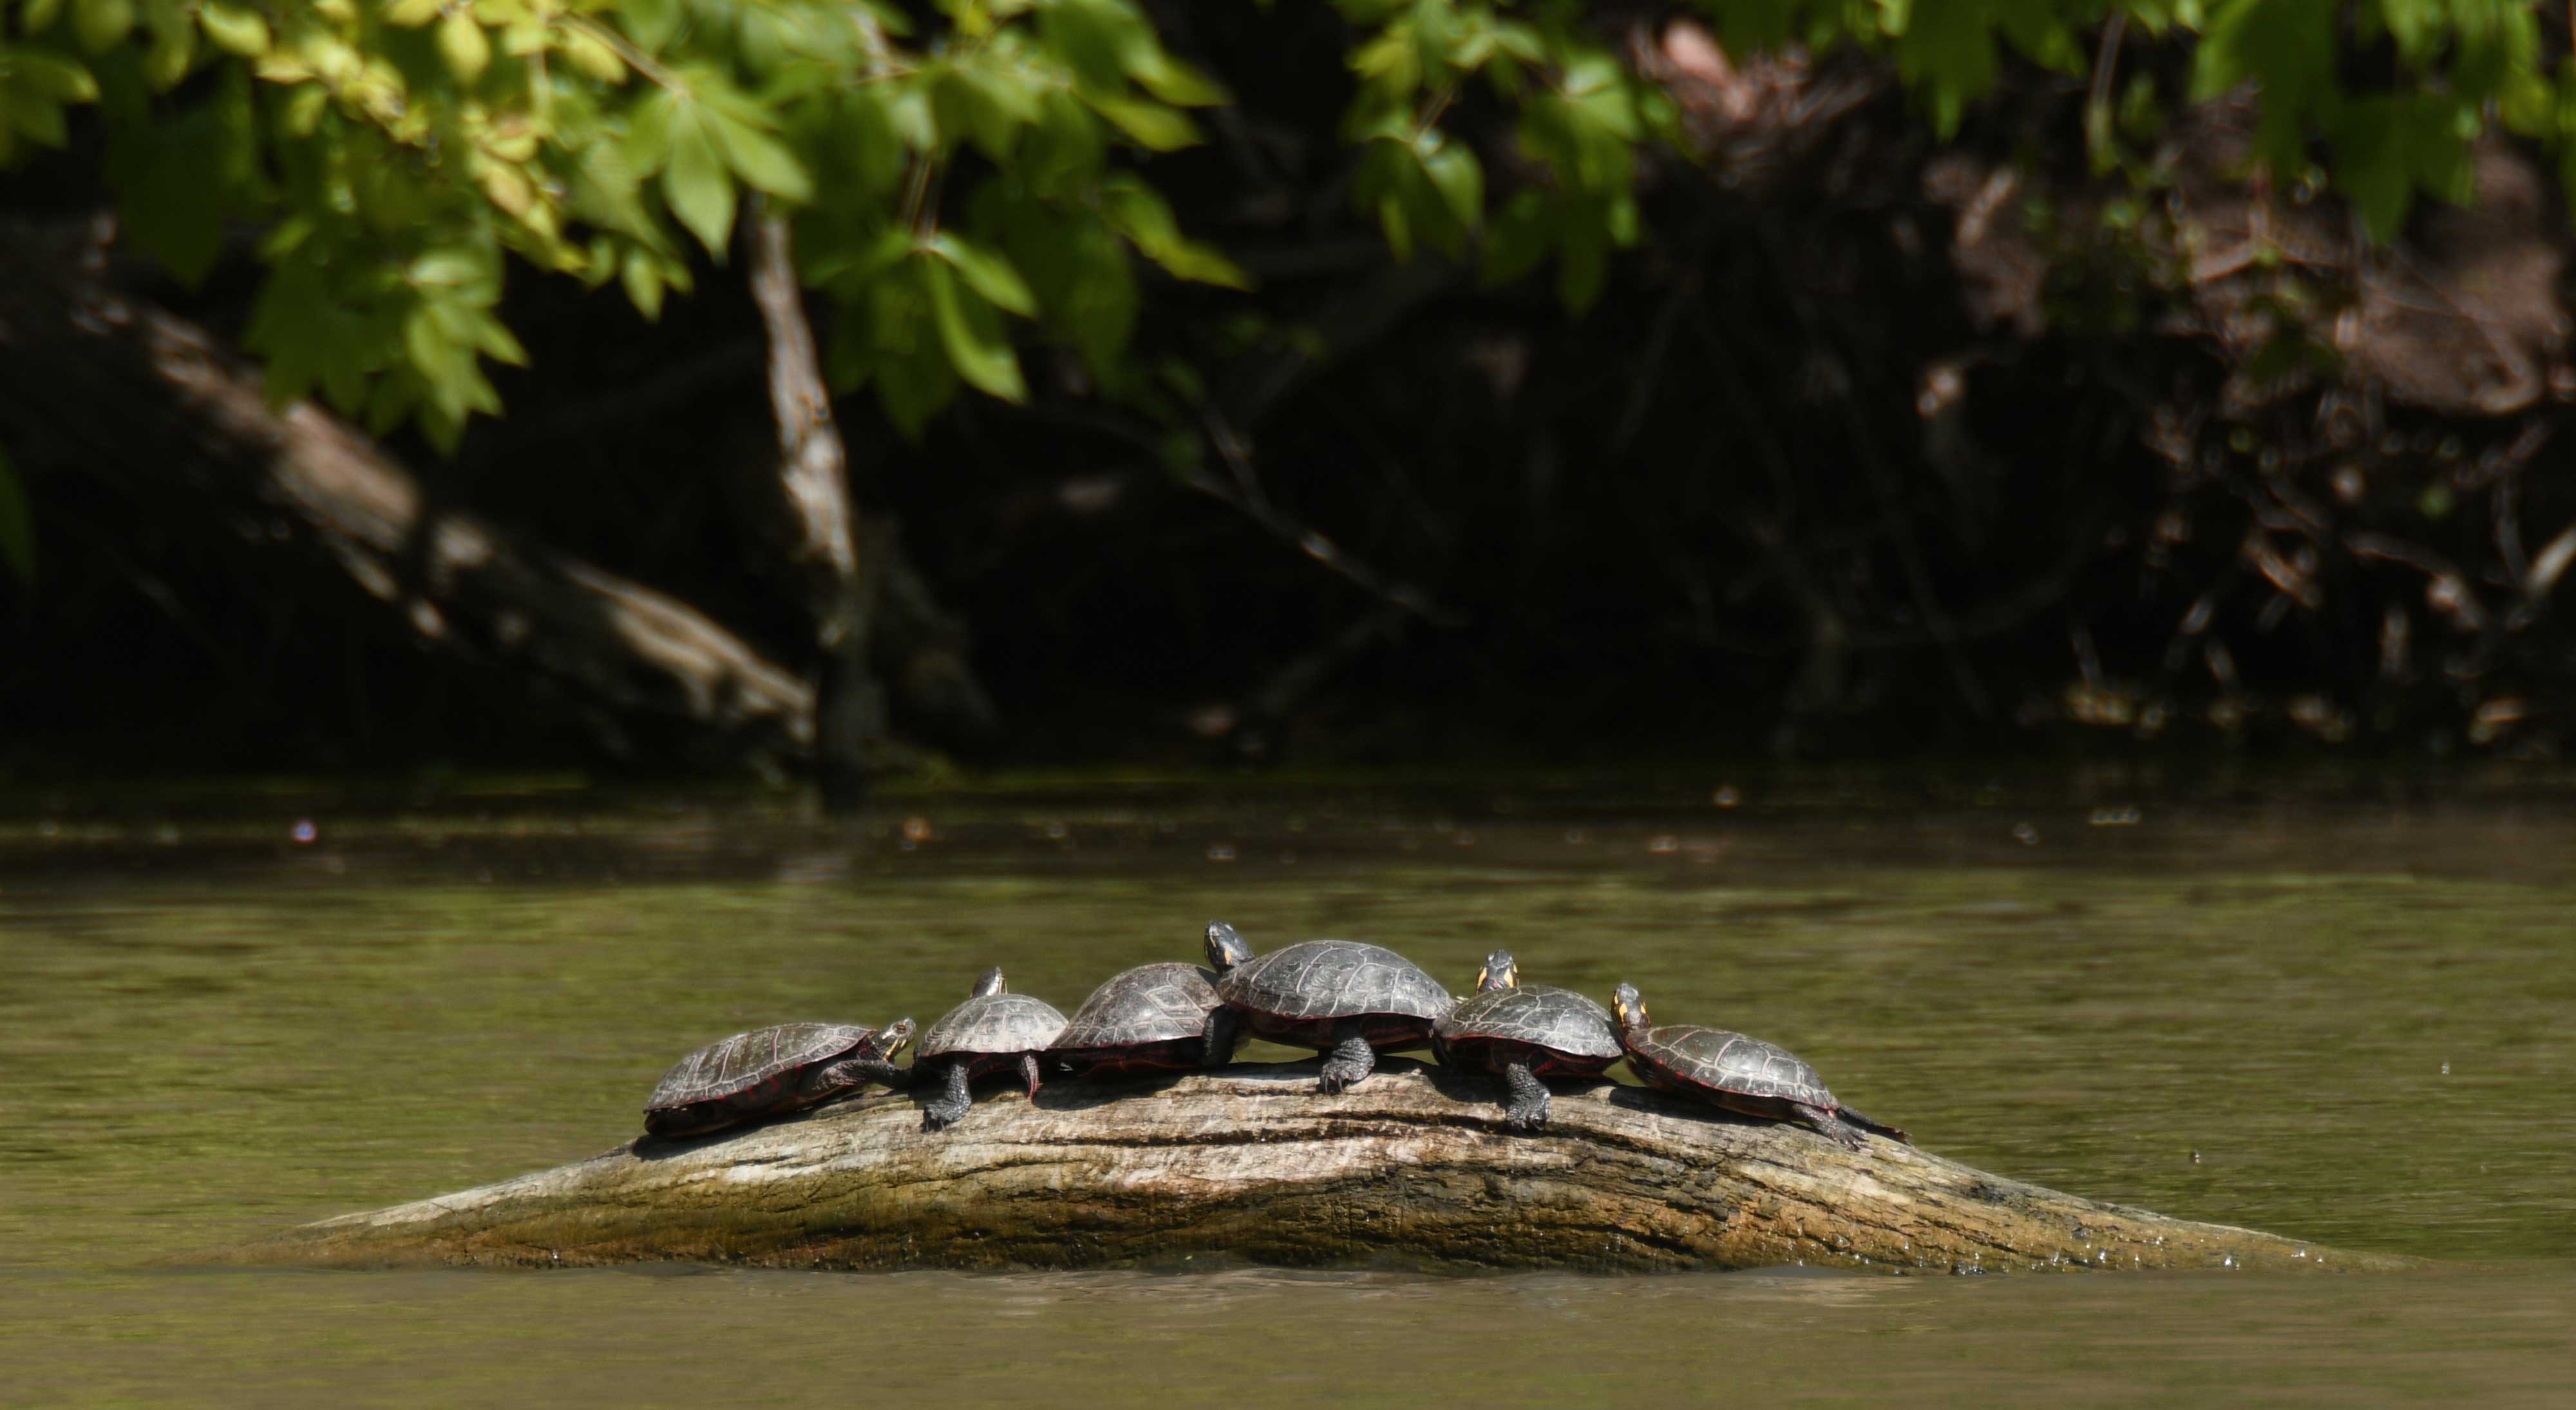 A group of turtles basking in the sun on a log at McKinley Woods.